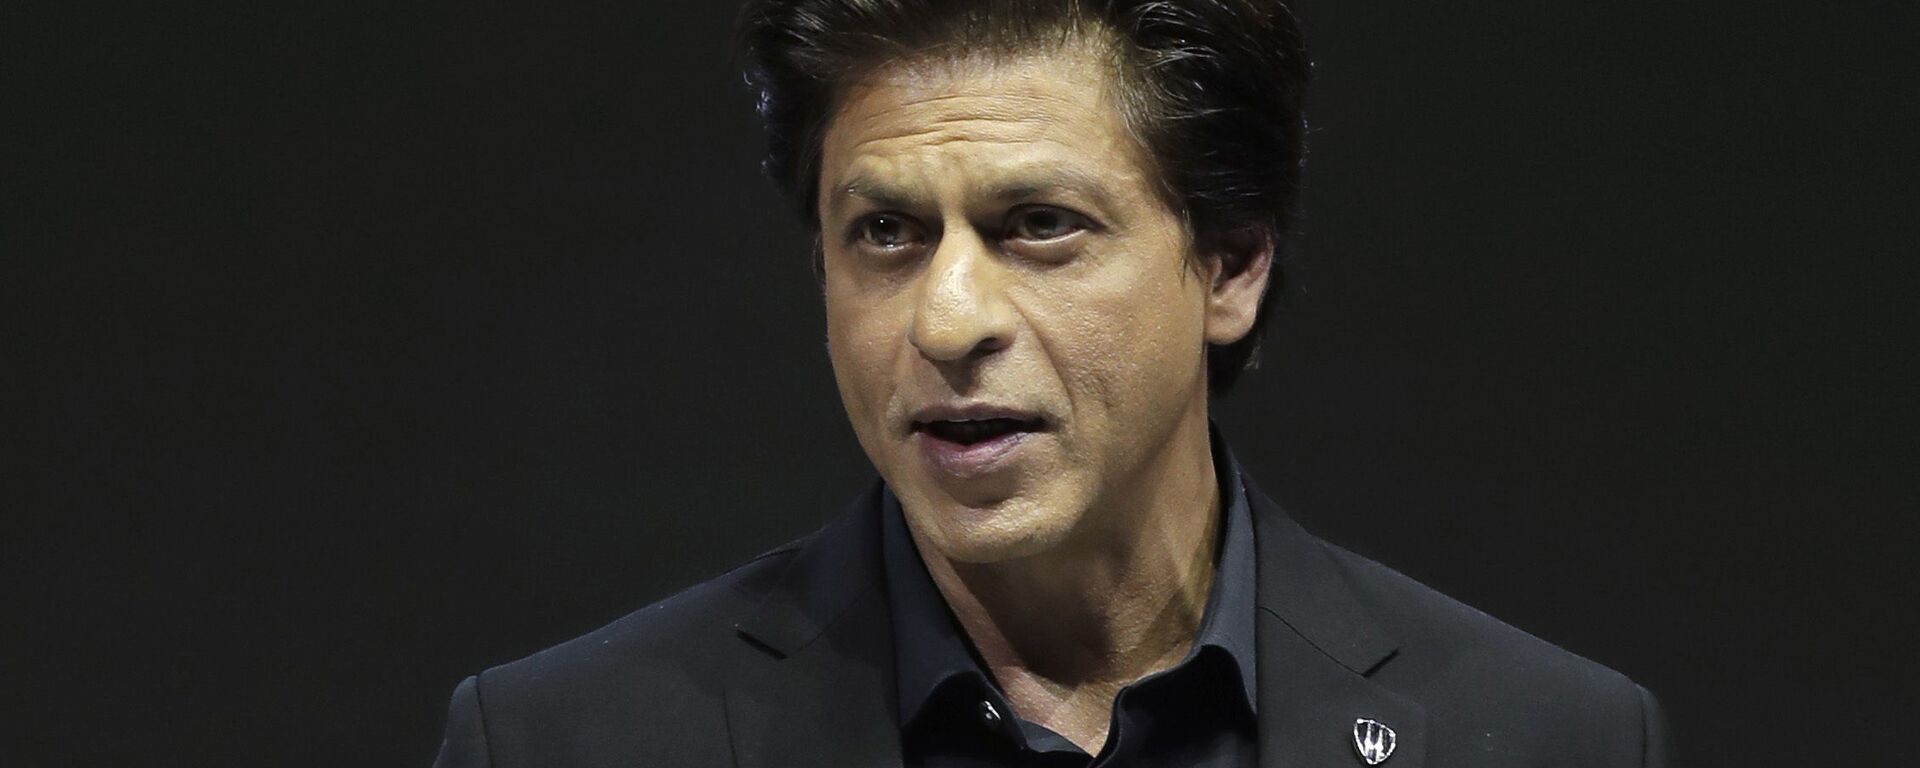 Indian actor Shah Rukh Khan delivers a speech when receiving a Crystal Award during a ceremony on the eve of annual meeting of the World Economic Forum in Davos, Switzerland, Monday, Jan. 22, 2018 - Sputnik International, 1920, 20.11.2019